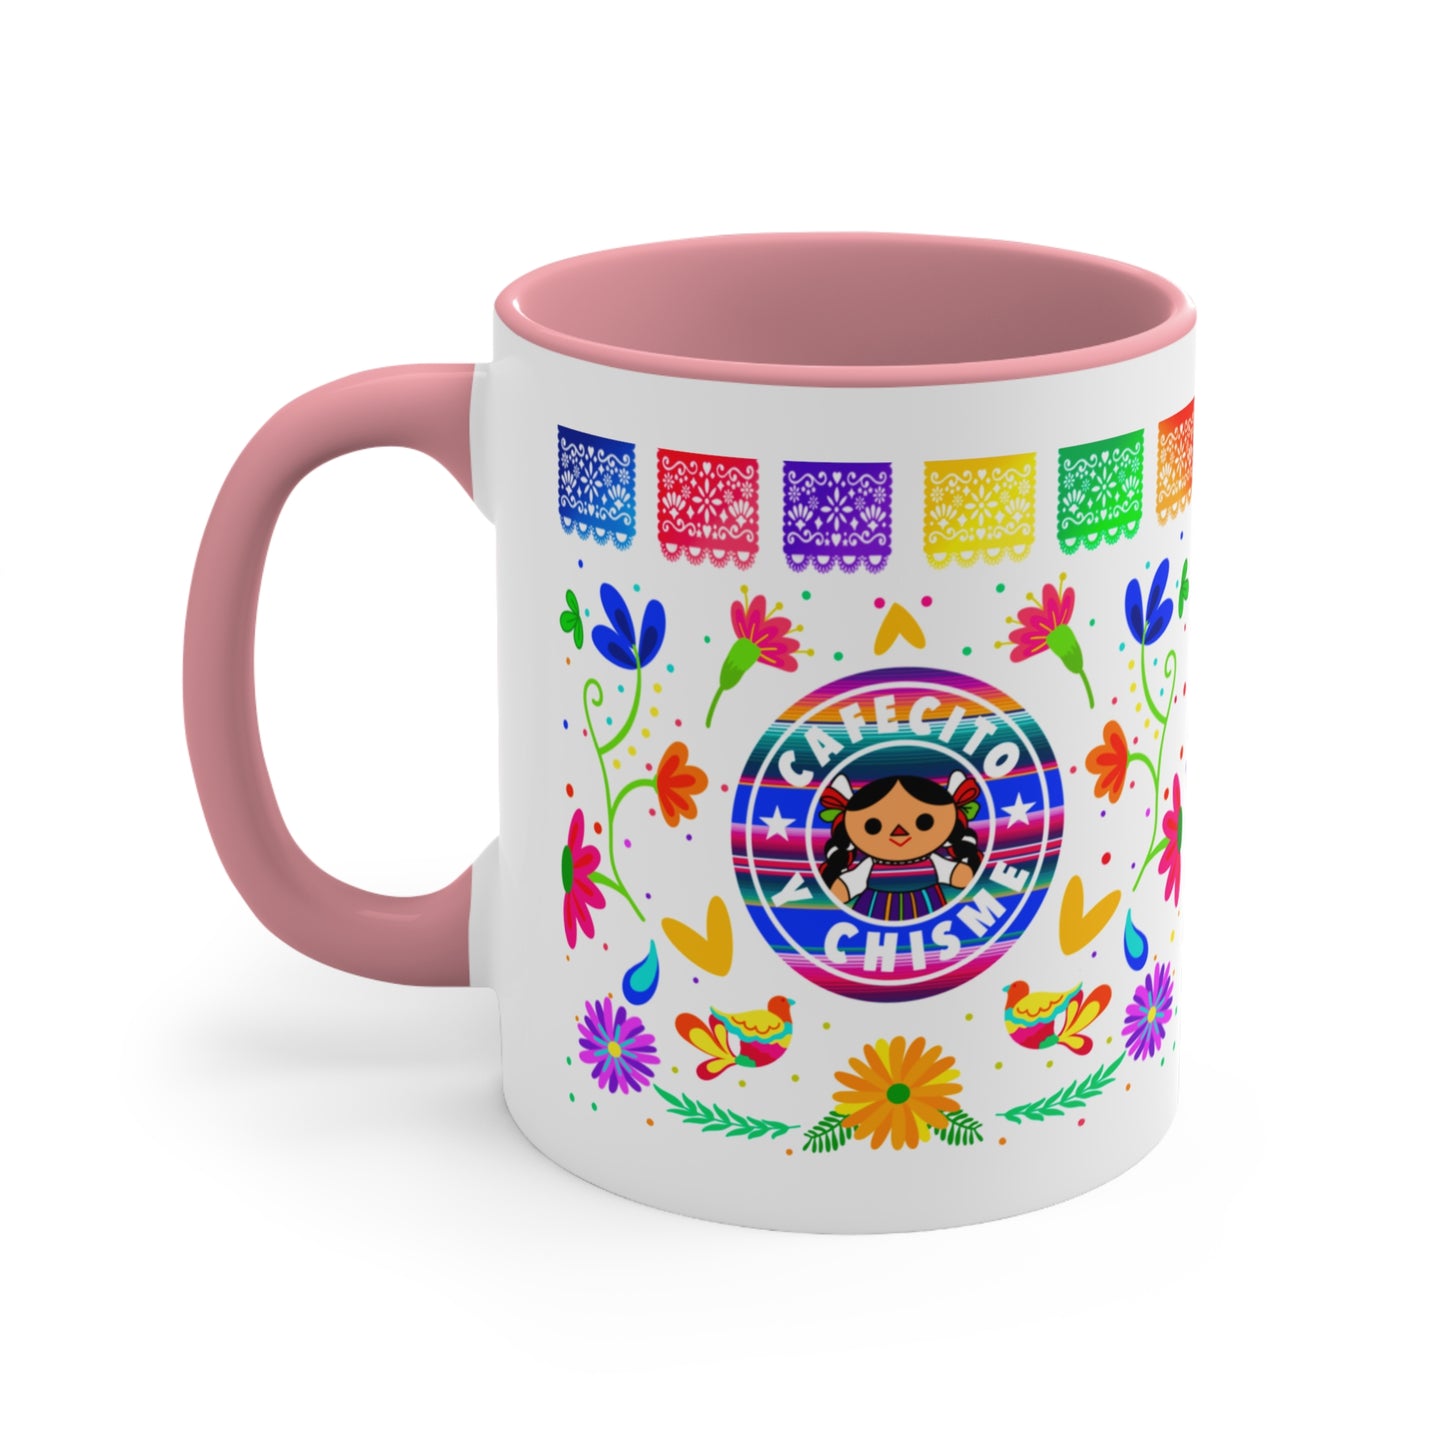 Cafecito y chisme Coffee Mug, 11oz. Mexican mug for her. Mexican gift ideas for woman. Café y chisme